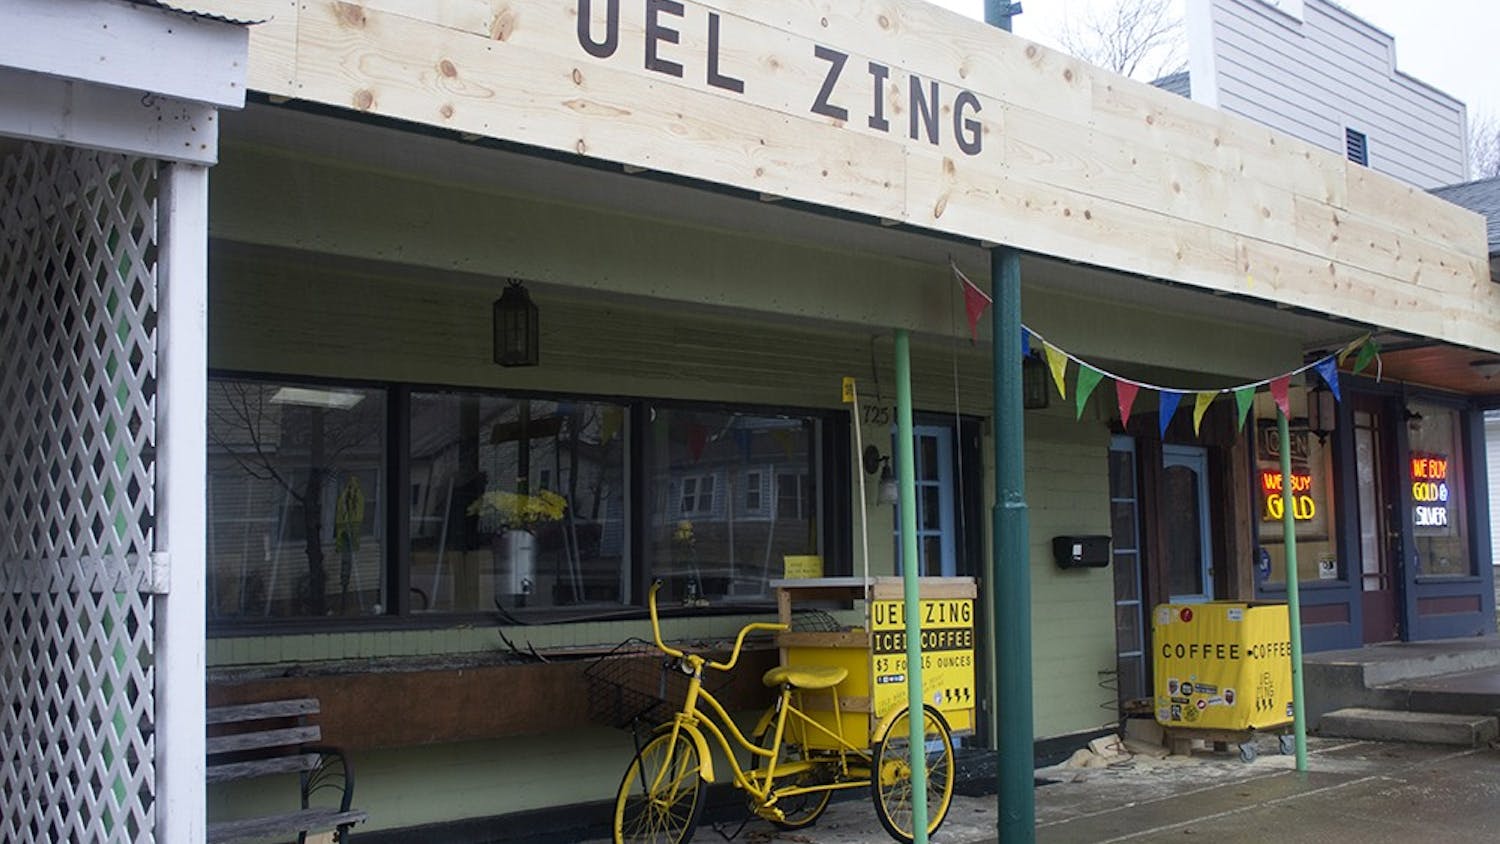 Uel-Zing's new store opened its doors on Saturday. The store is an addition to the traveling bike-stand that sells iced coffee.